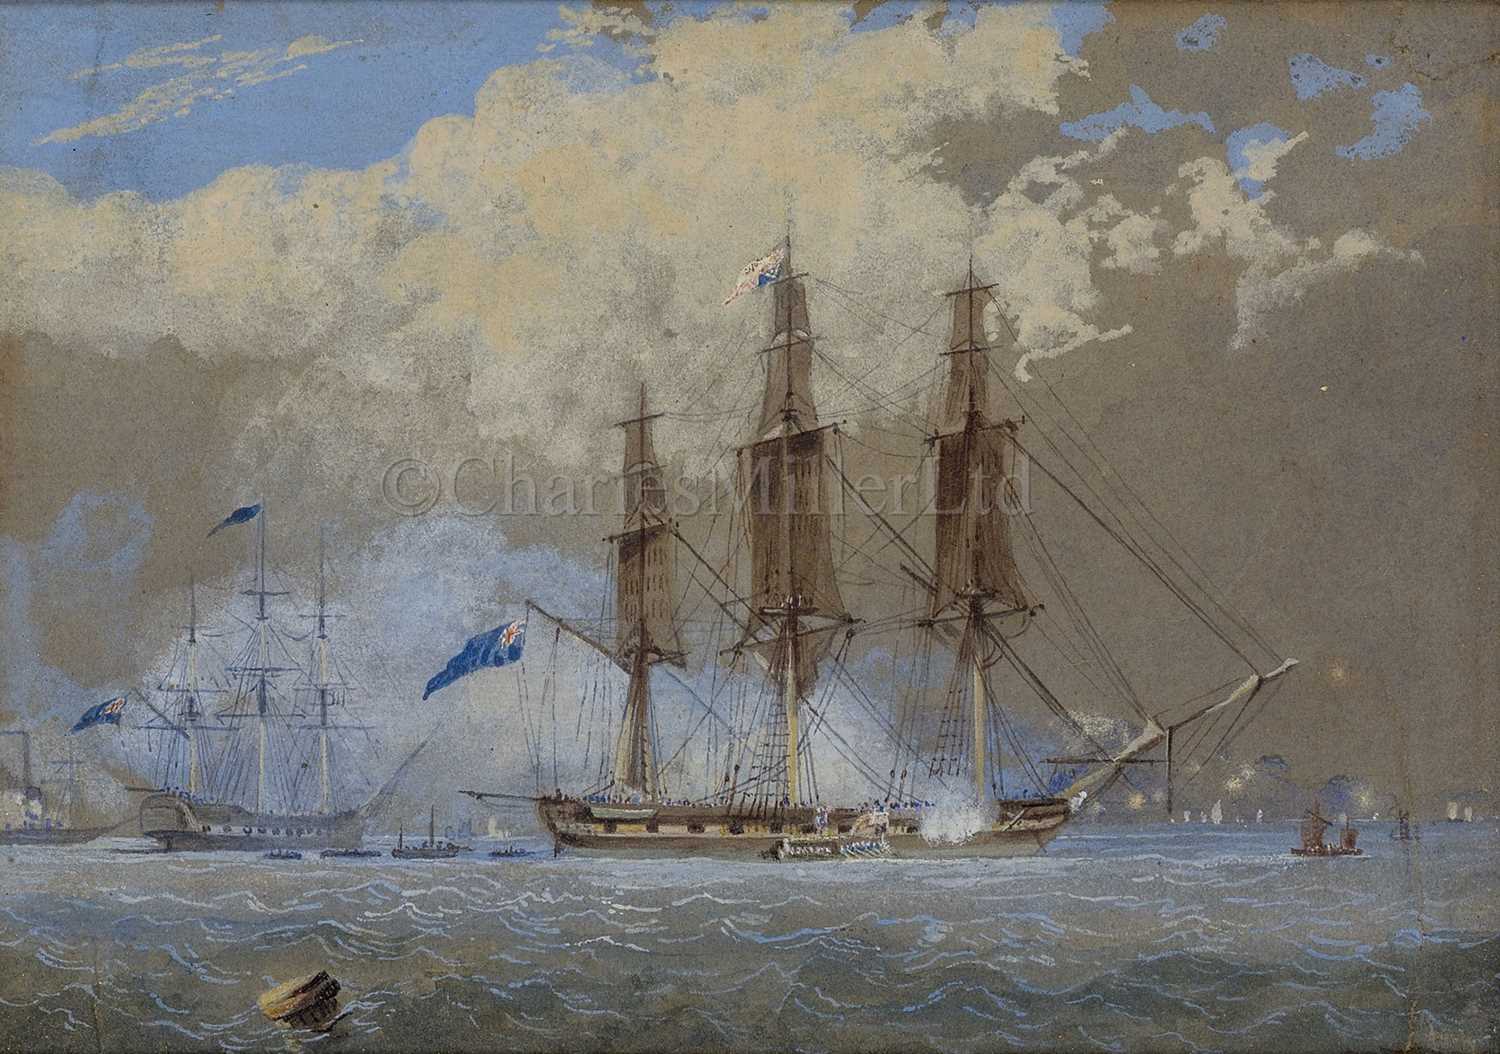 Lot 83 - ATTRIBUTED TO NICHOLAS CONDY (BRITISH, 1793-1857) The arrival of George IV aboard R.Y. 'Royal George', Weymouth, circa 1820